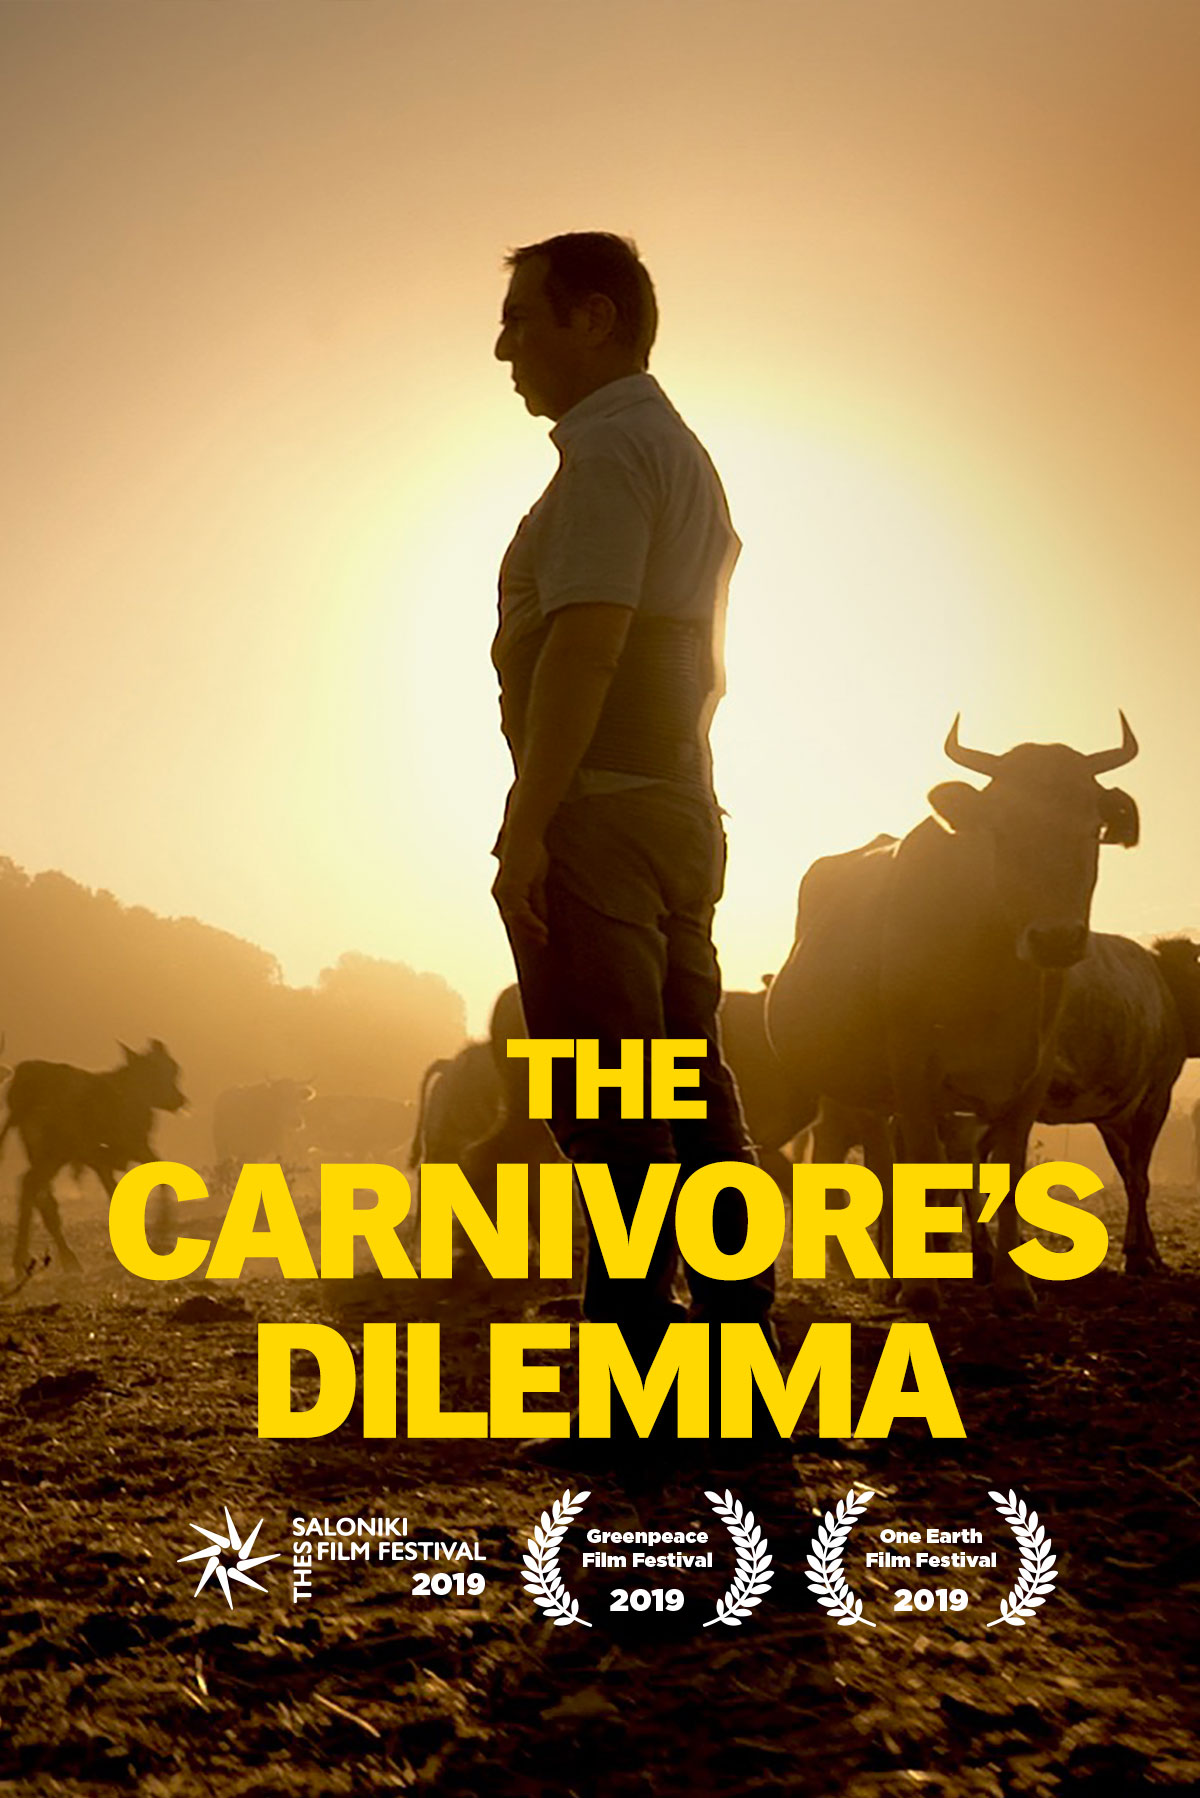 The Carnivore's Dilemma